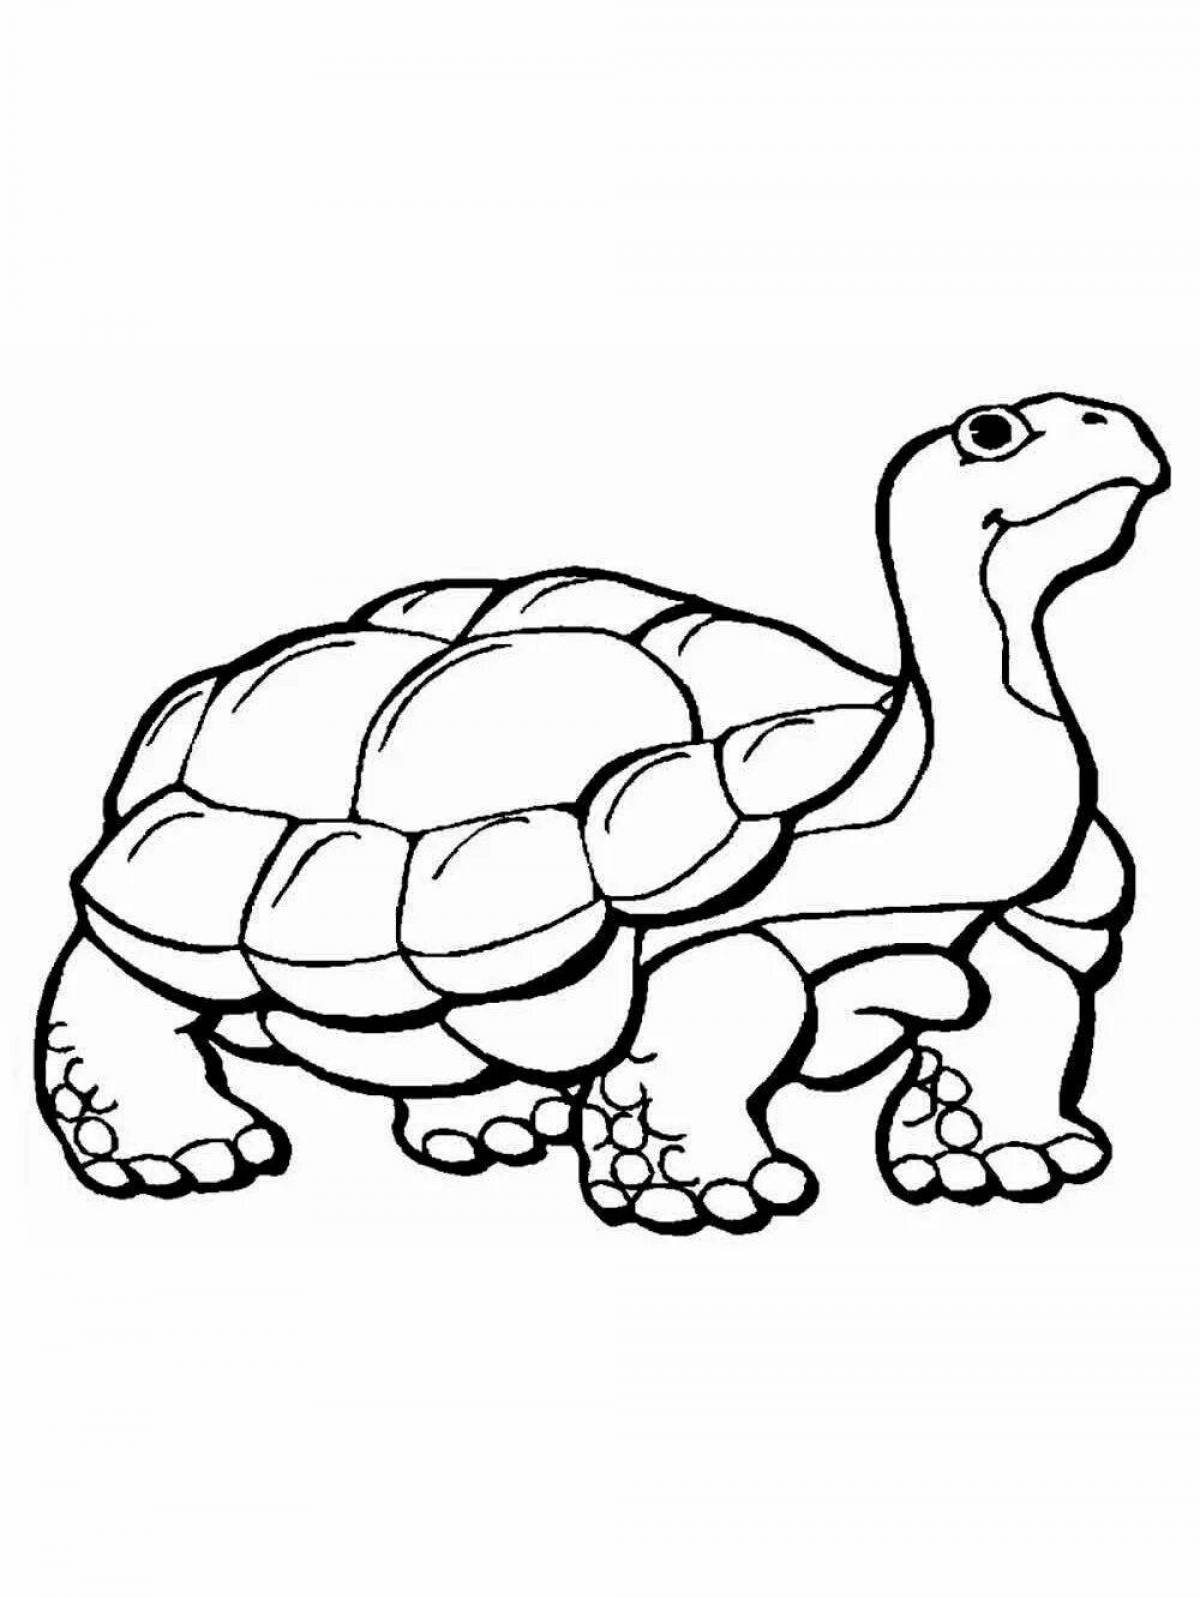 Playful turtle coloring book for kids